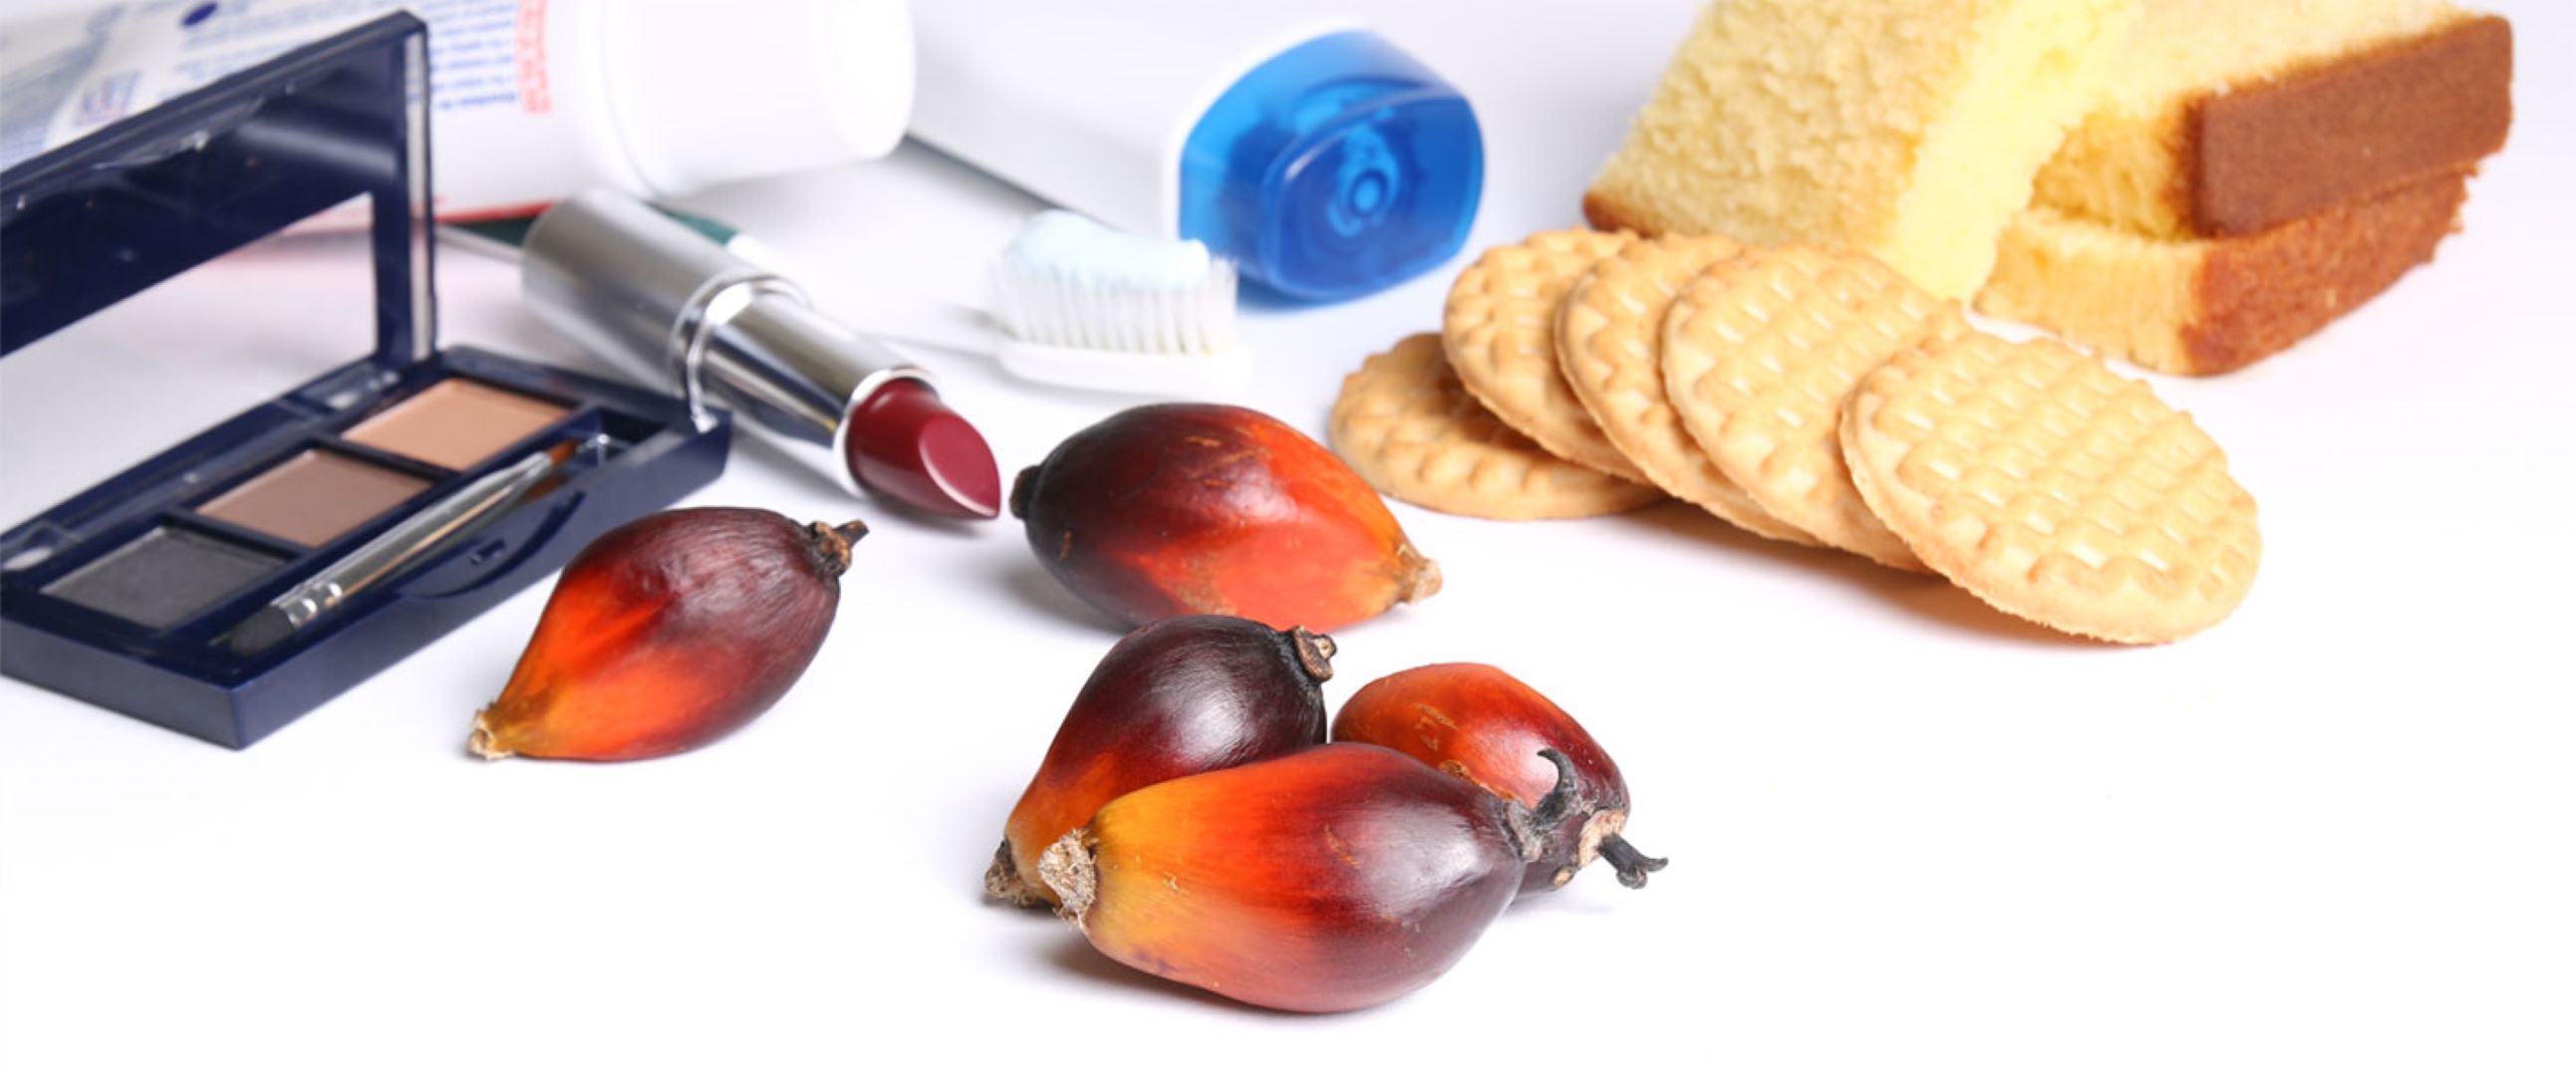 Palm fruits and products containing palm oil, including makeup, toothpaste, soap, and baked goods.